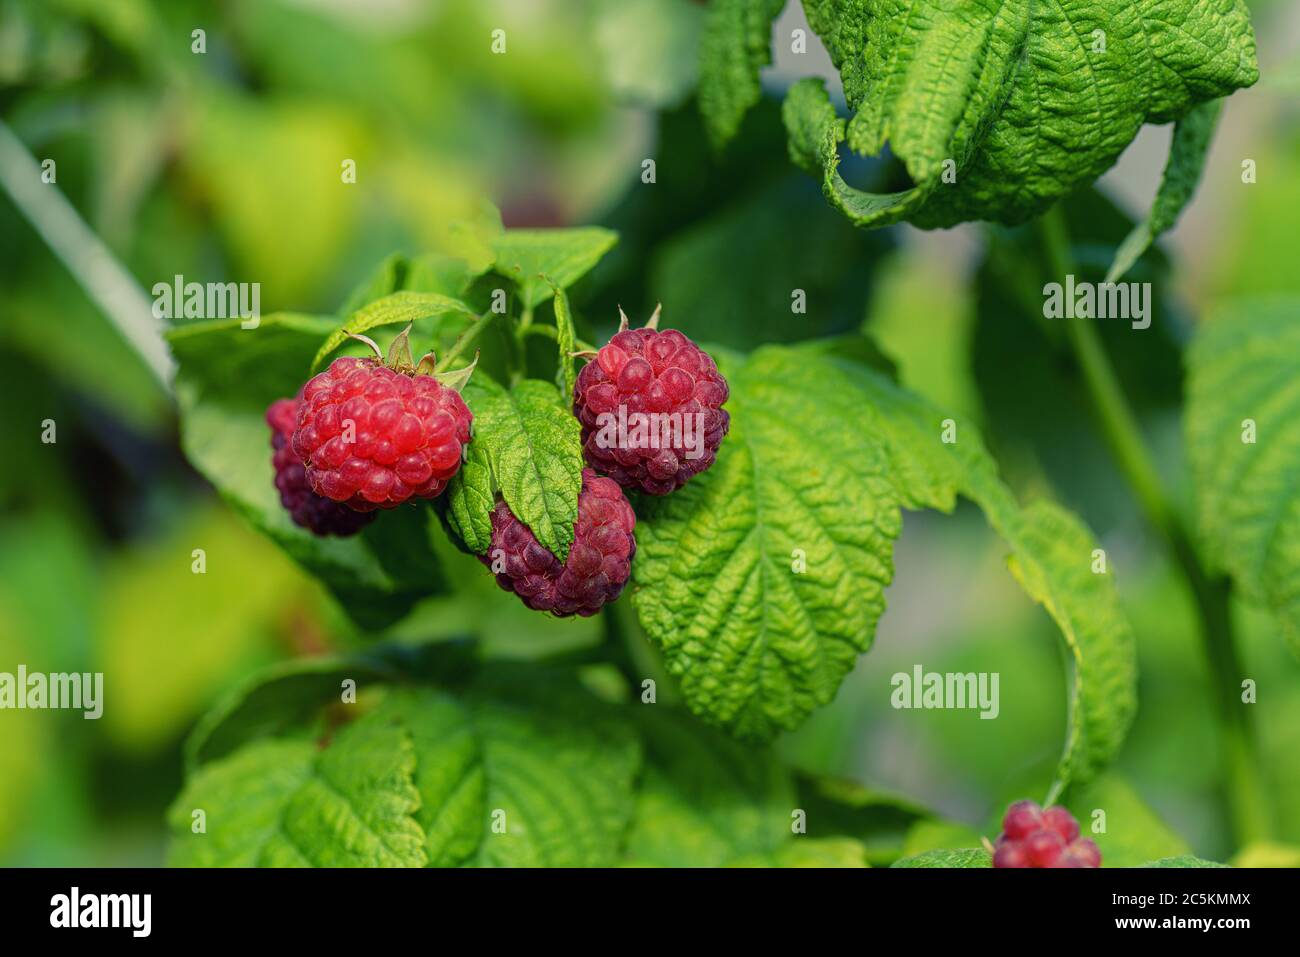 Raspberries in the sun. Photo of ripe raspberries on a branch. Raspberries on a branch in the garden. Red berry with green leaves in the sun. Stock Photo